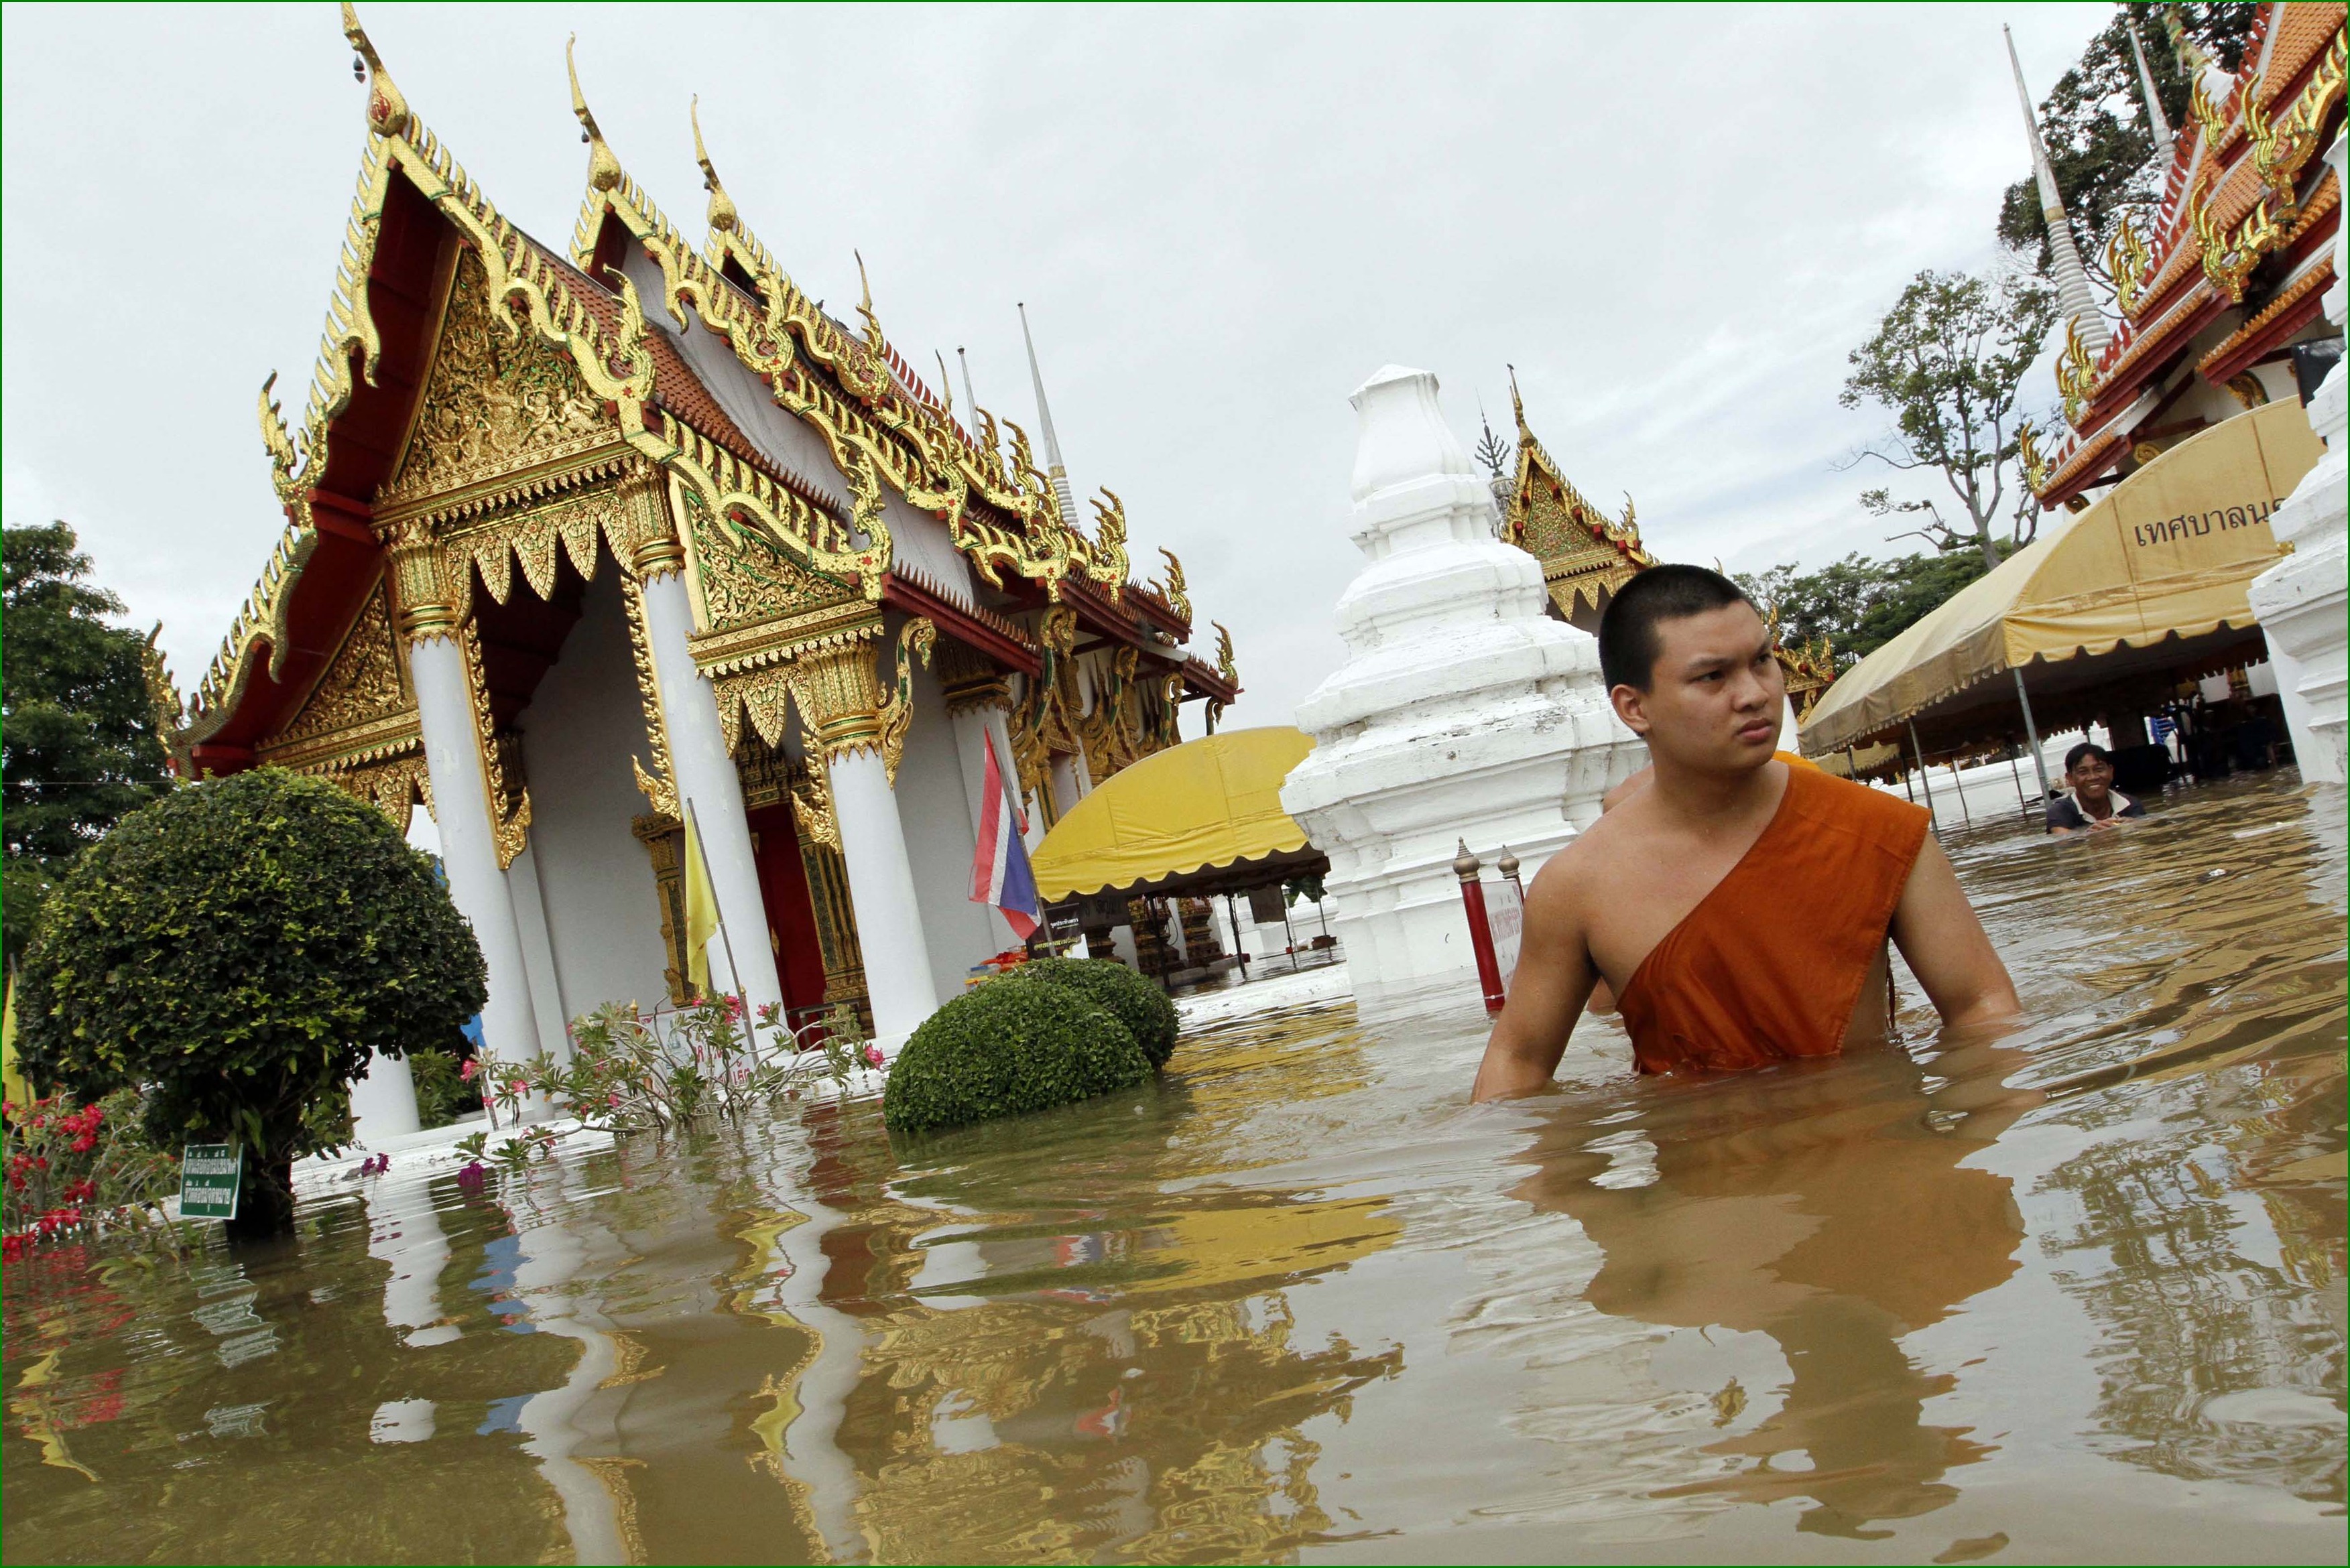 DUE TO FLOODING IN THAILAND SUFFERED MORE THAN 2 MILLION